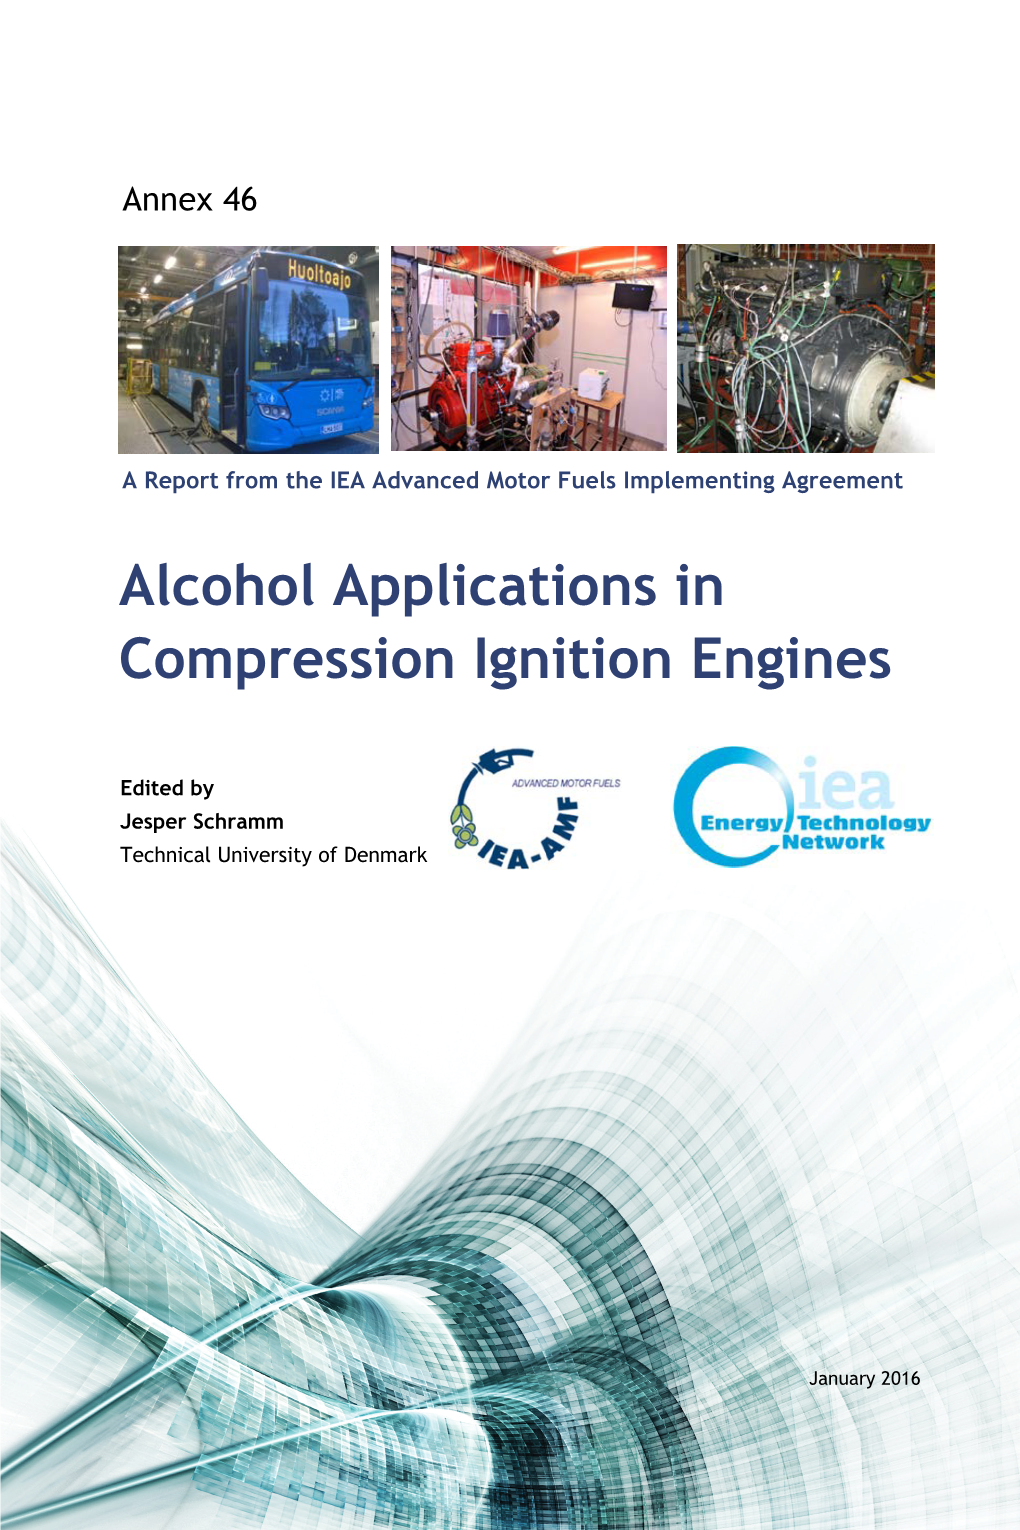 Alcohol Applications in Compression Ignition Engines